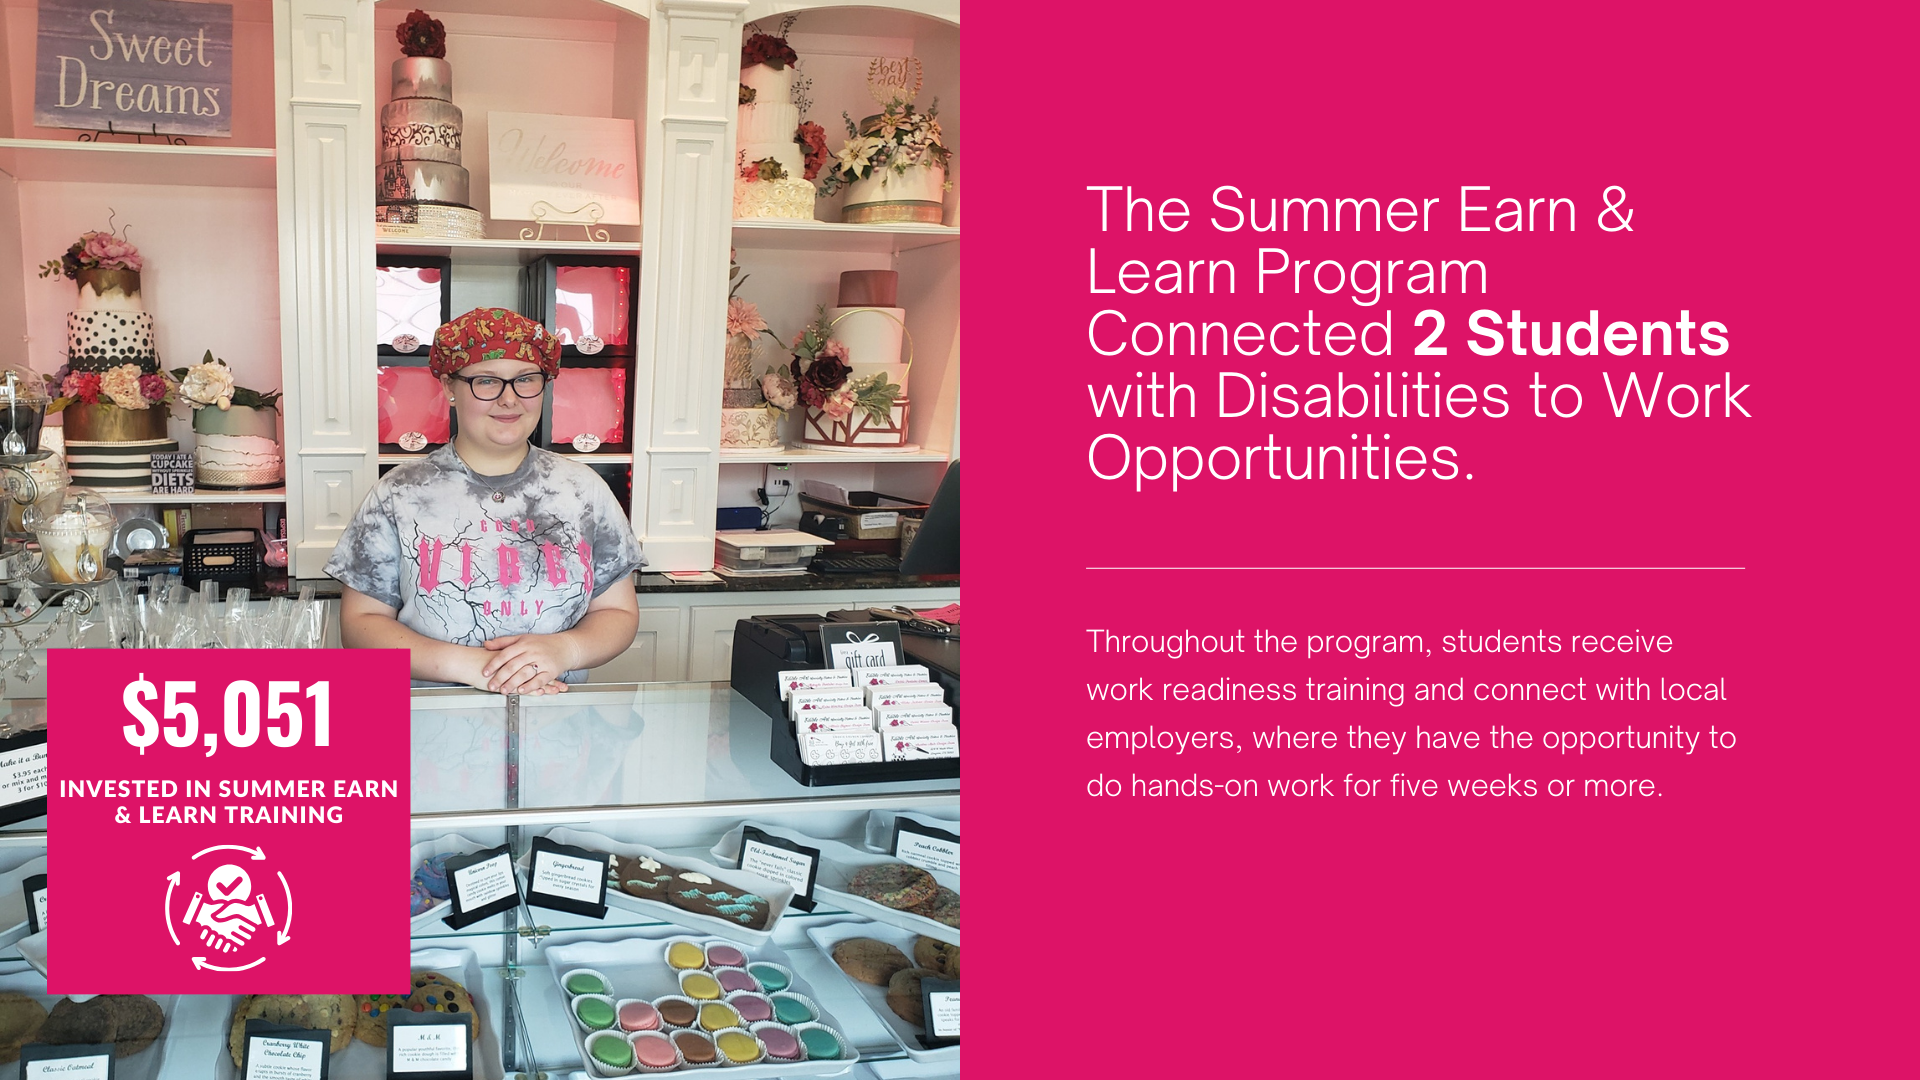 The summer earn and learn program connected 2 students with disabilities to work opportunities